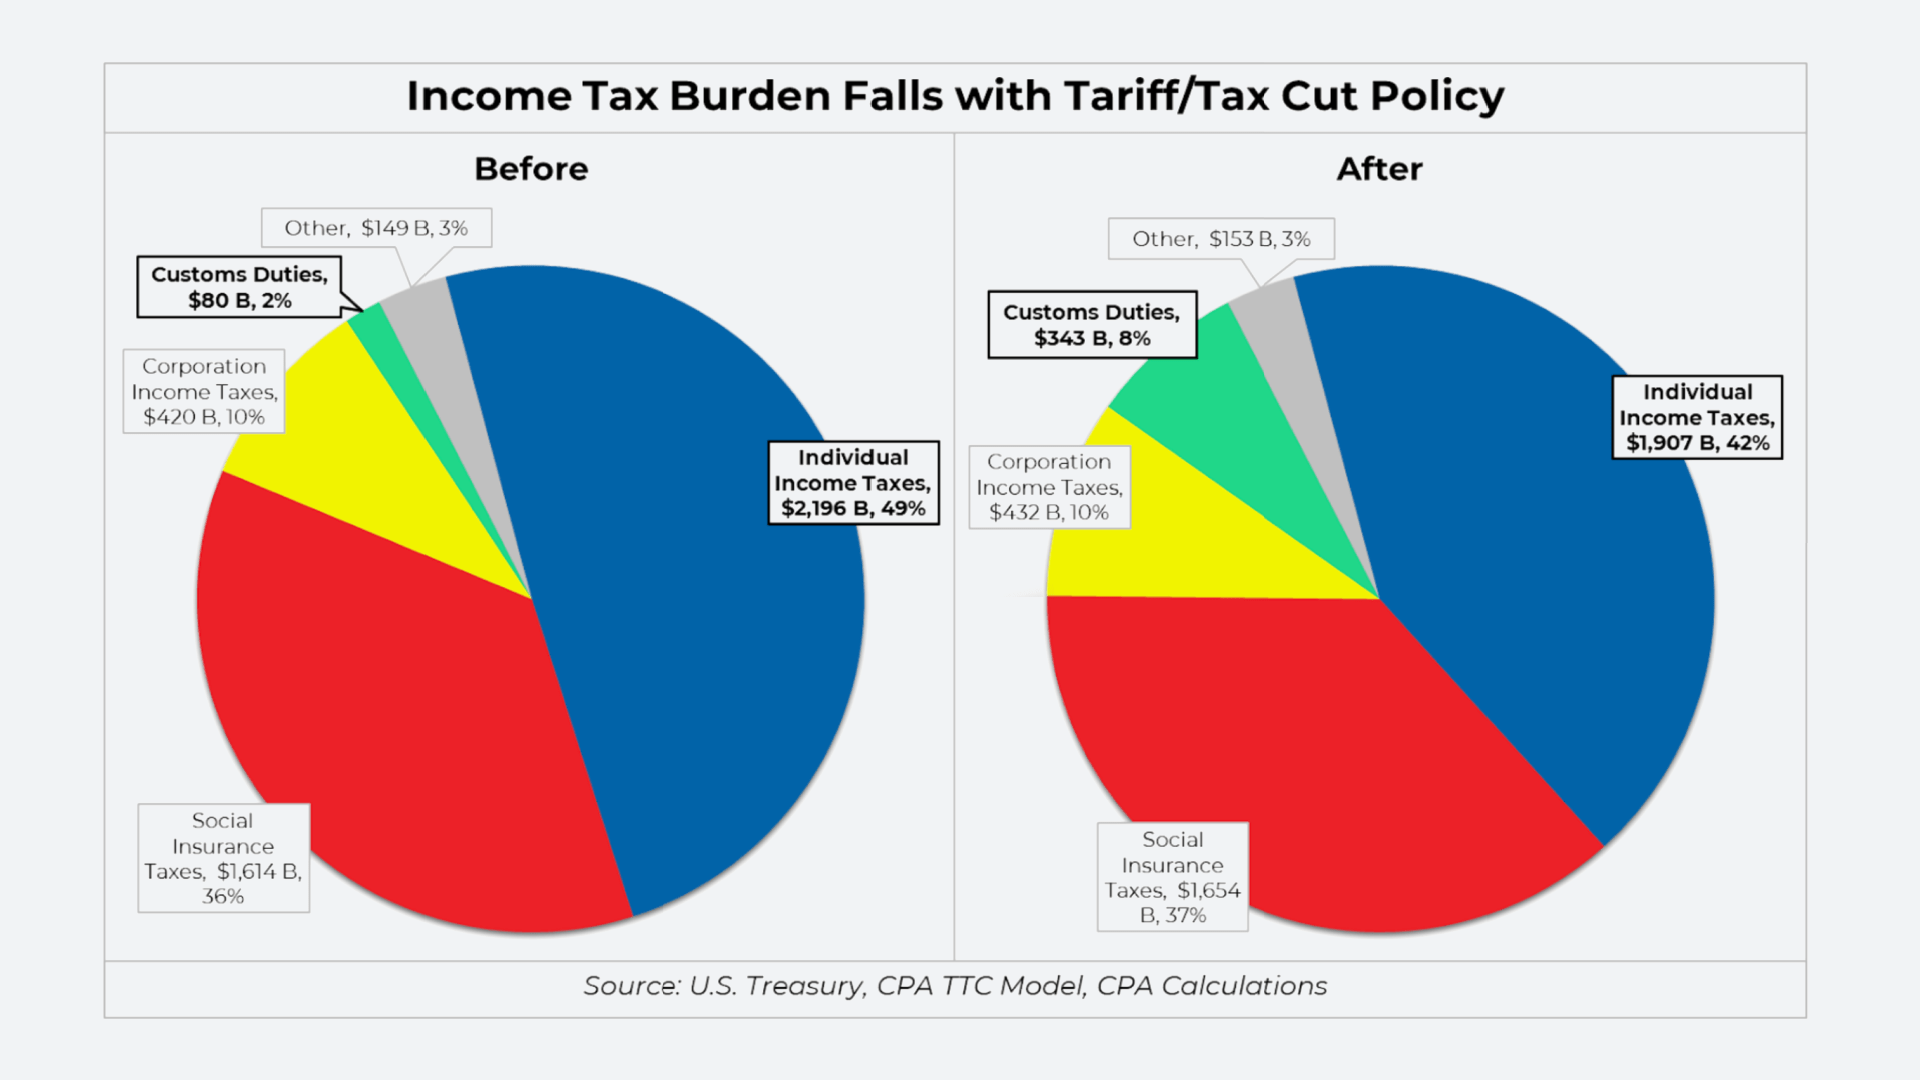 Global 10% Tariffs on U.S. Imports Would Raise Incomes and Pay for Large Income Tax Cuts for Lower/Middle Class